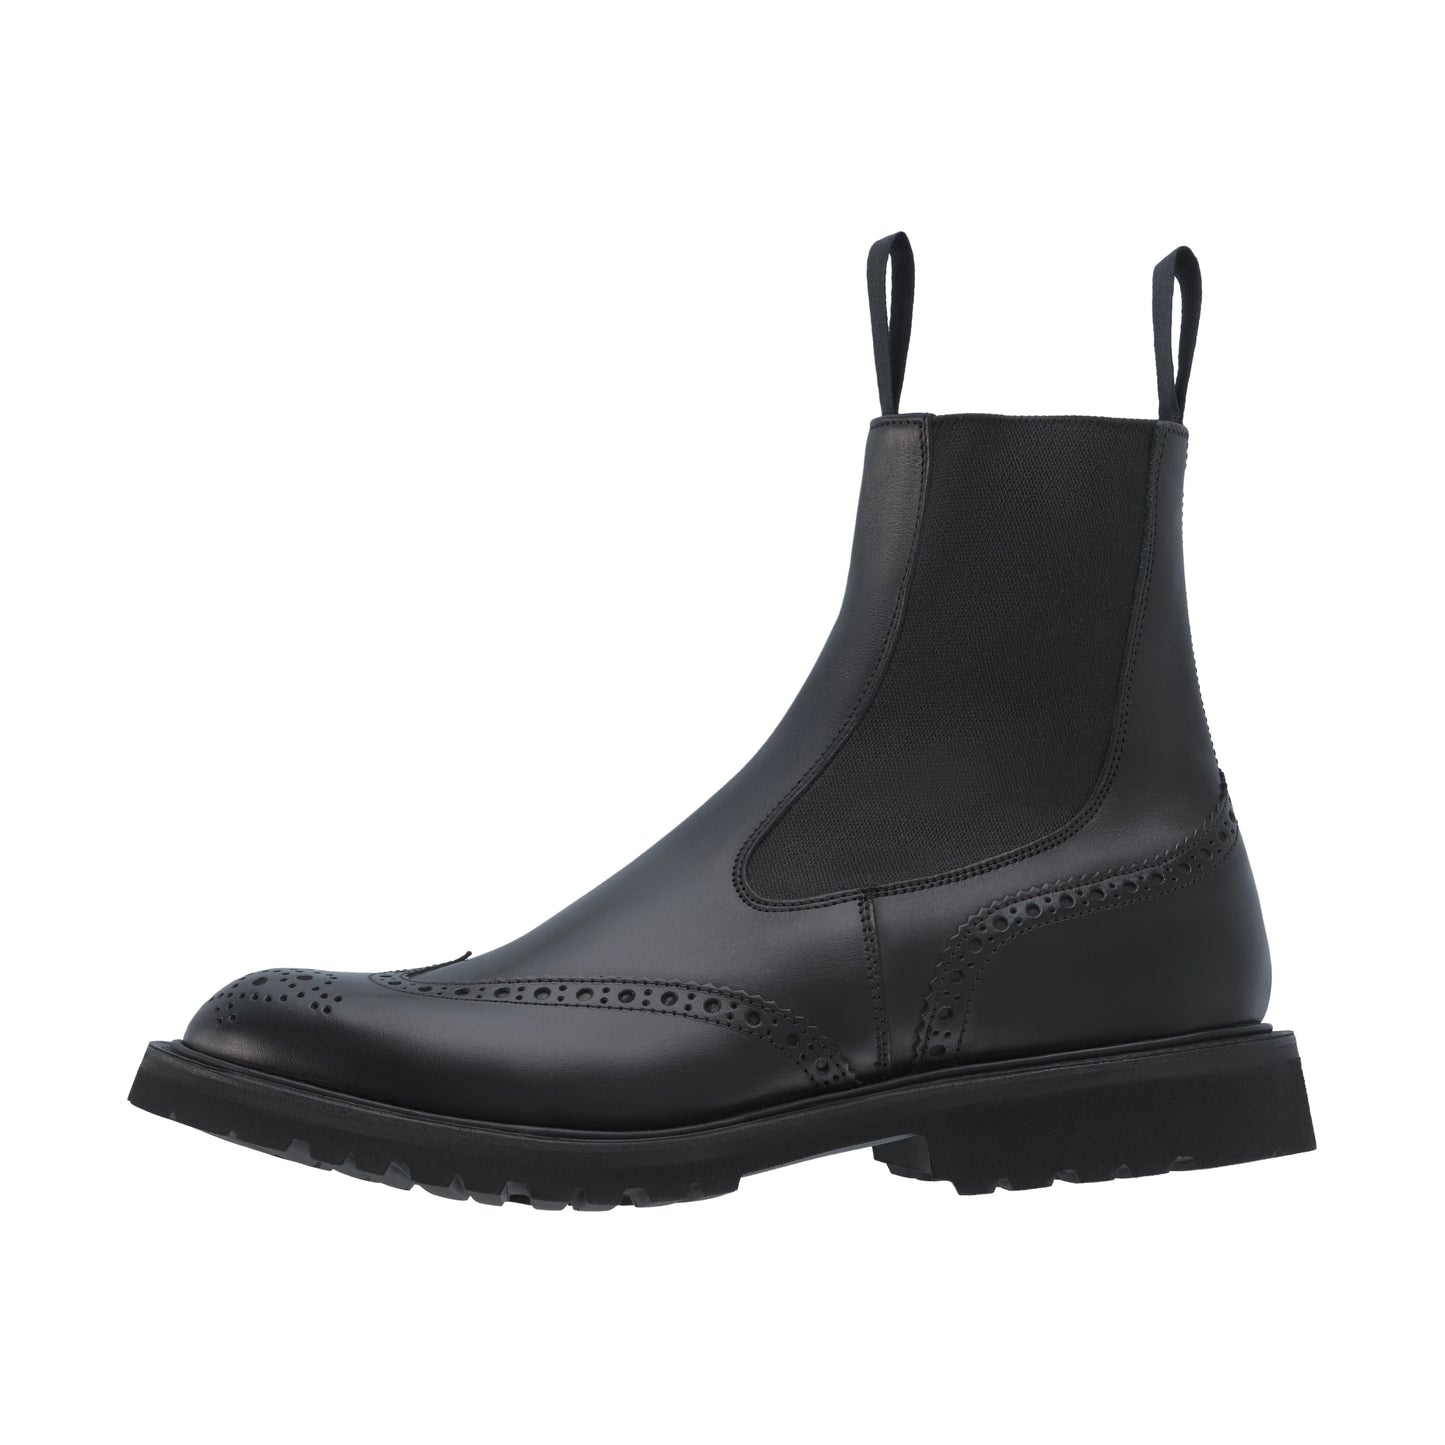 "Henry" Leather Slip-On Chelsea Boots in Black